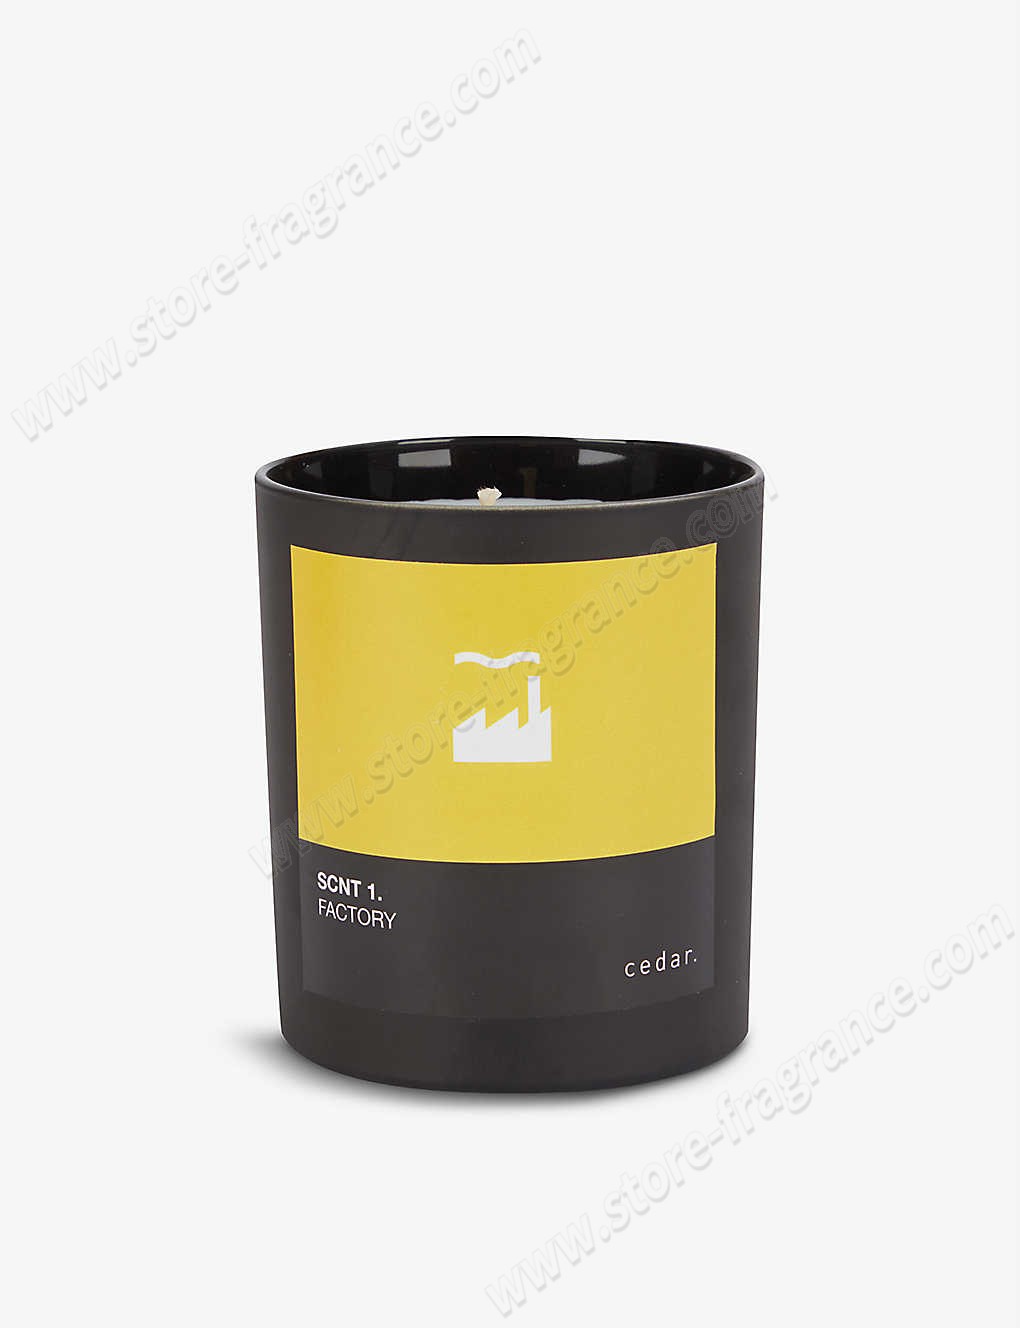 FACTORY RECORDS/Factory Records x Cedar SCNT 1. FACTORY natural-wax candle 240g ✿ Discount Store - FACTORY RECORDS/Factory Records x Cedar SCNT 1. FACTORY natural-wax candle 240g ✿ Discount Store